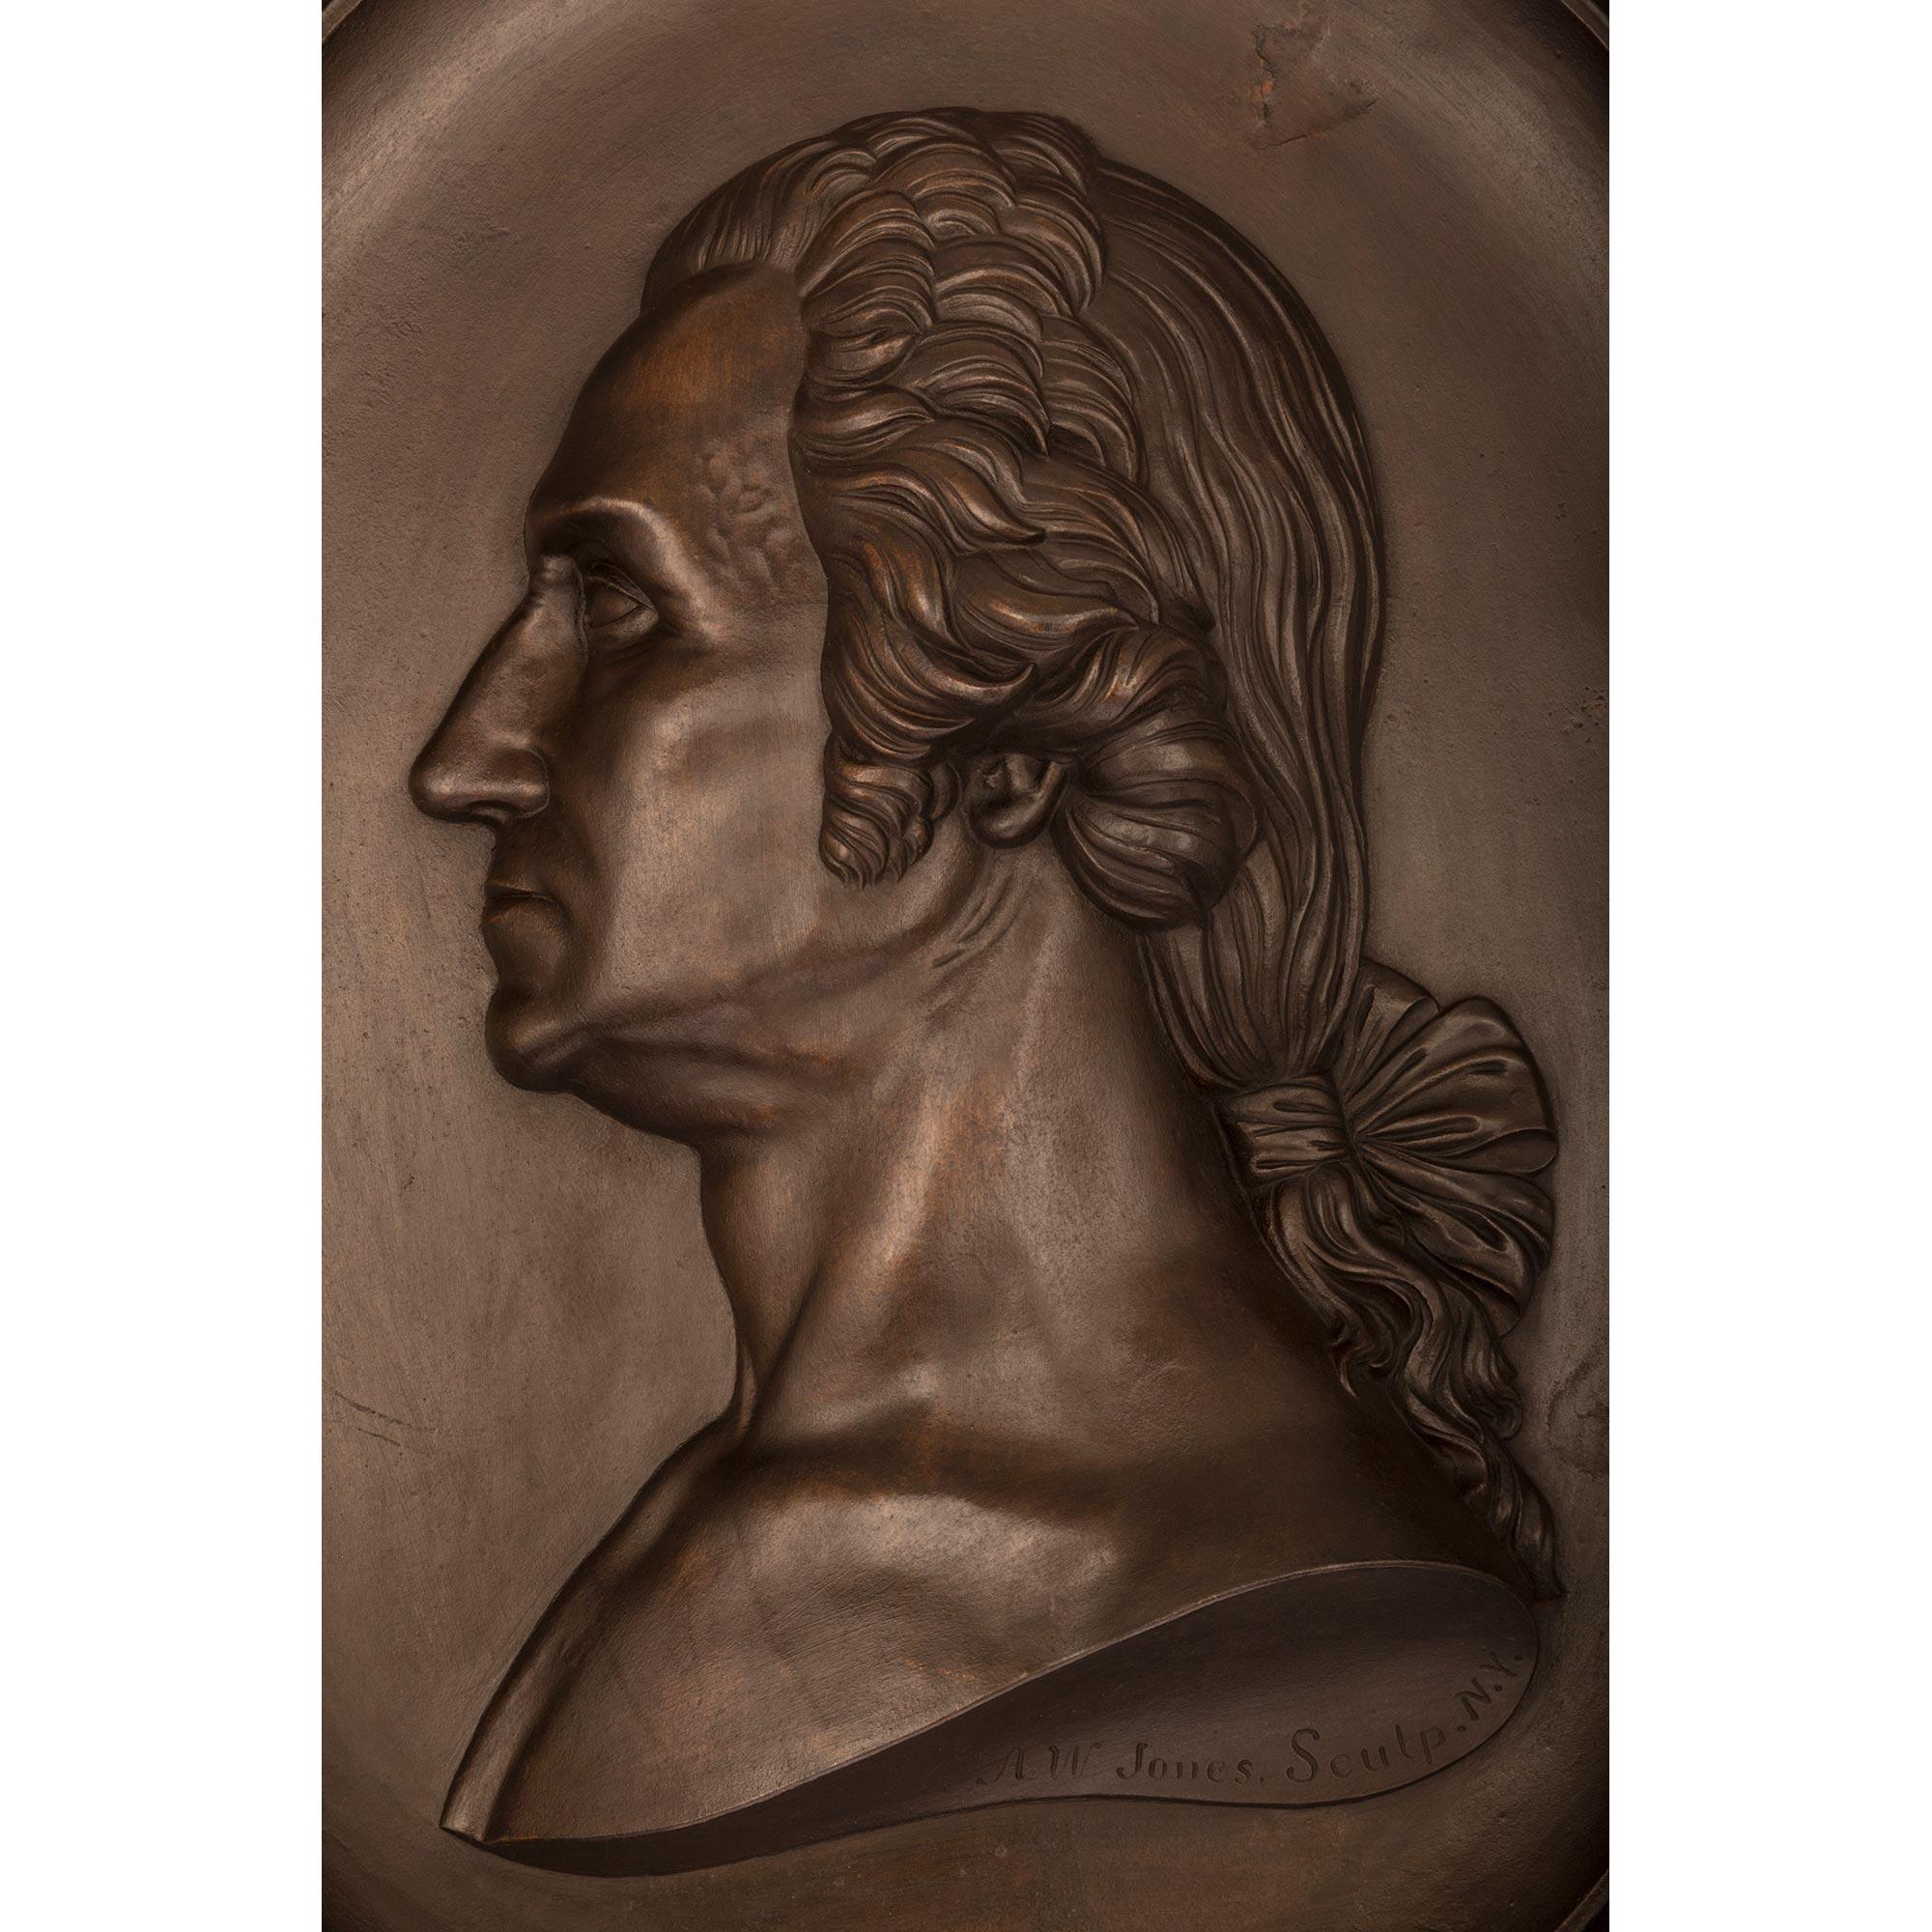 A beautiful and very high quality American 19th century Louis XVI st. patinated bronze plaque of George Washington by Anthony W. Jones circa 1858. The plaque displays an exceptional and most decorative oak branch with fine acorns and an olive branch